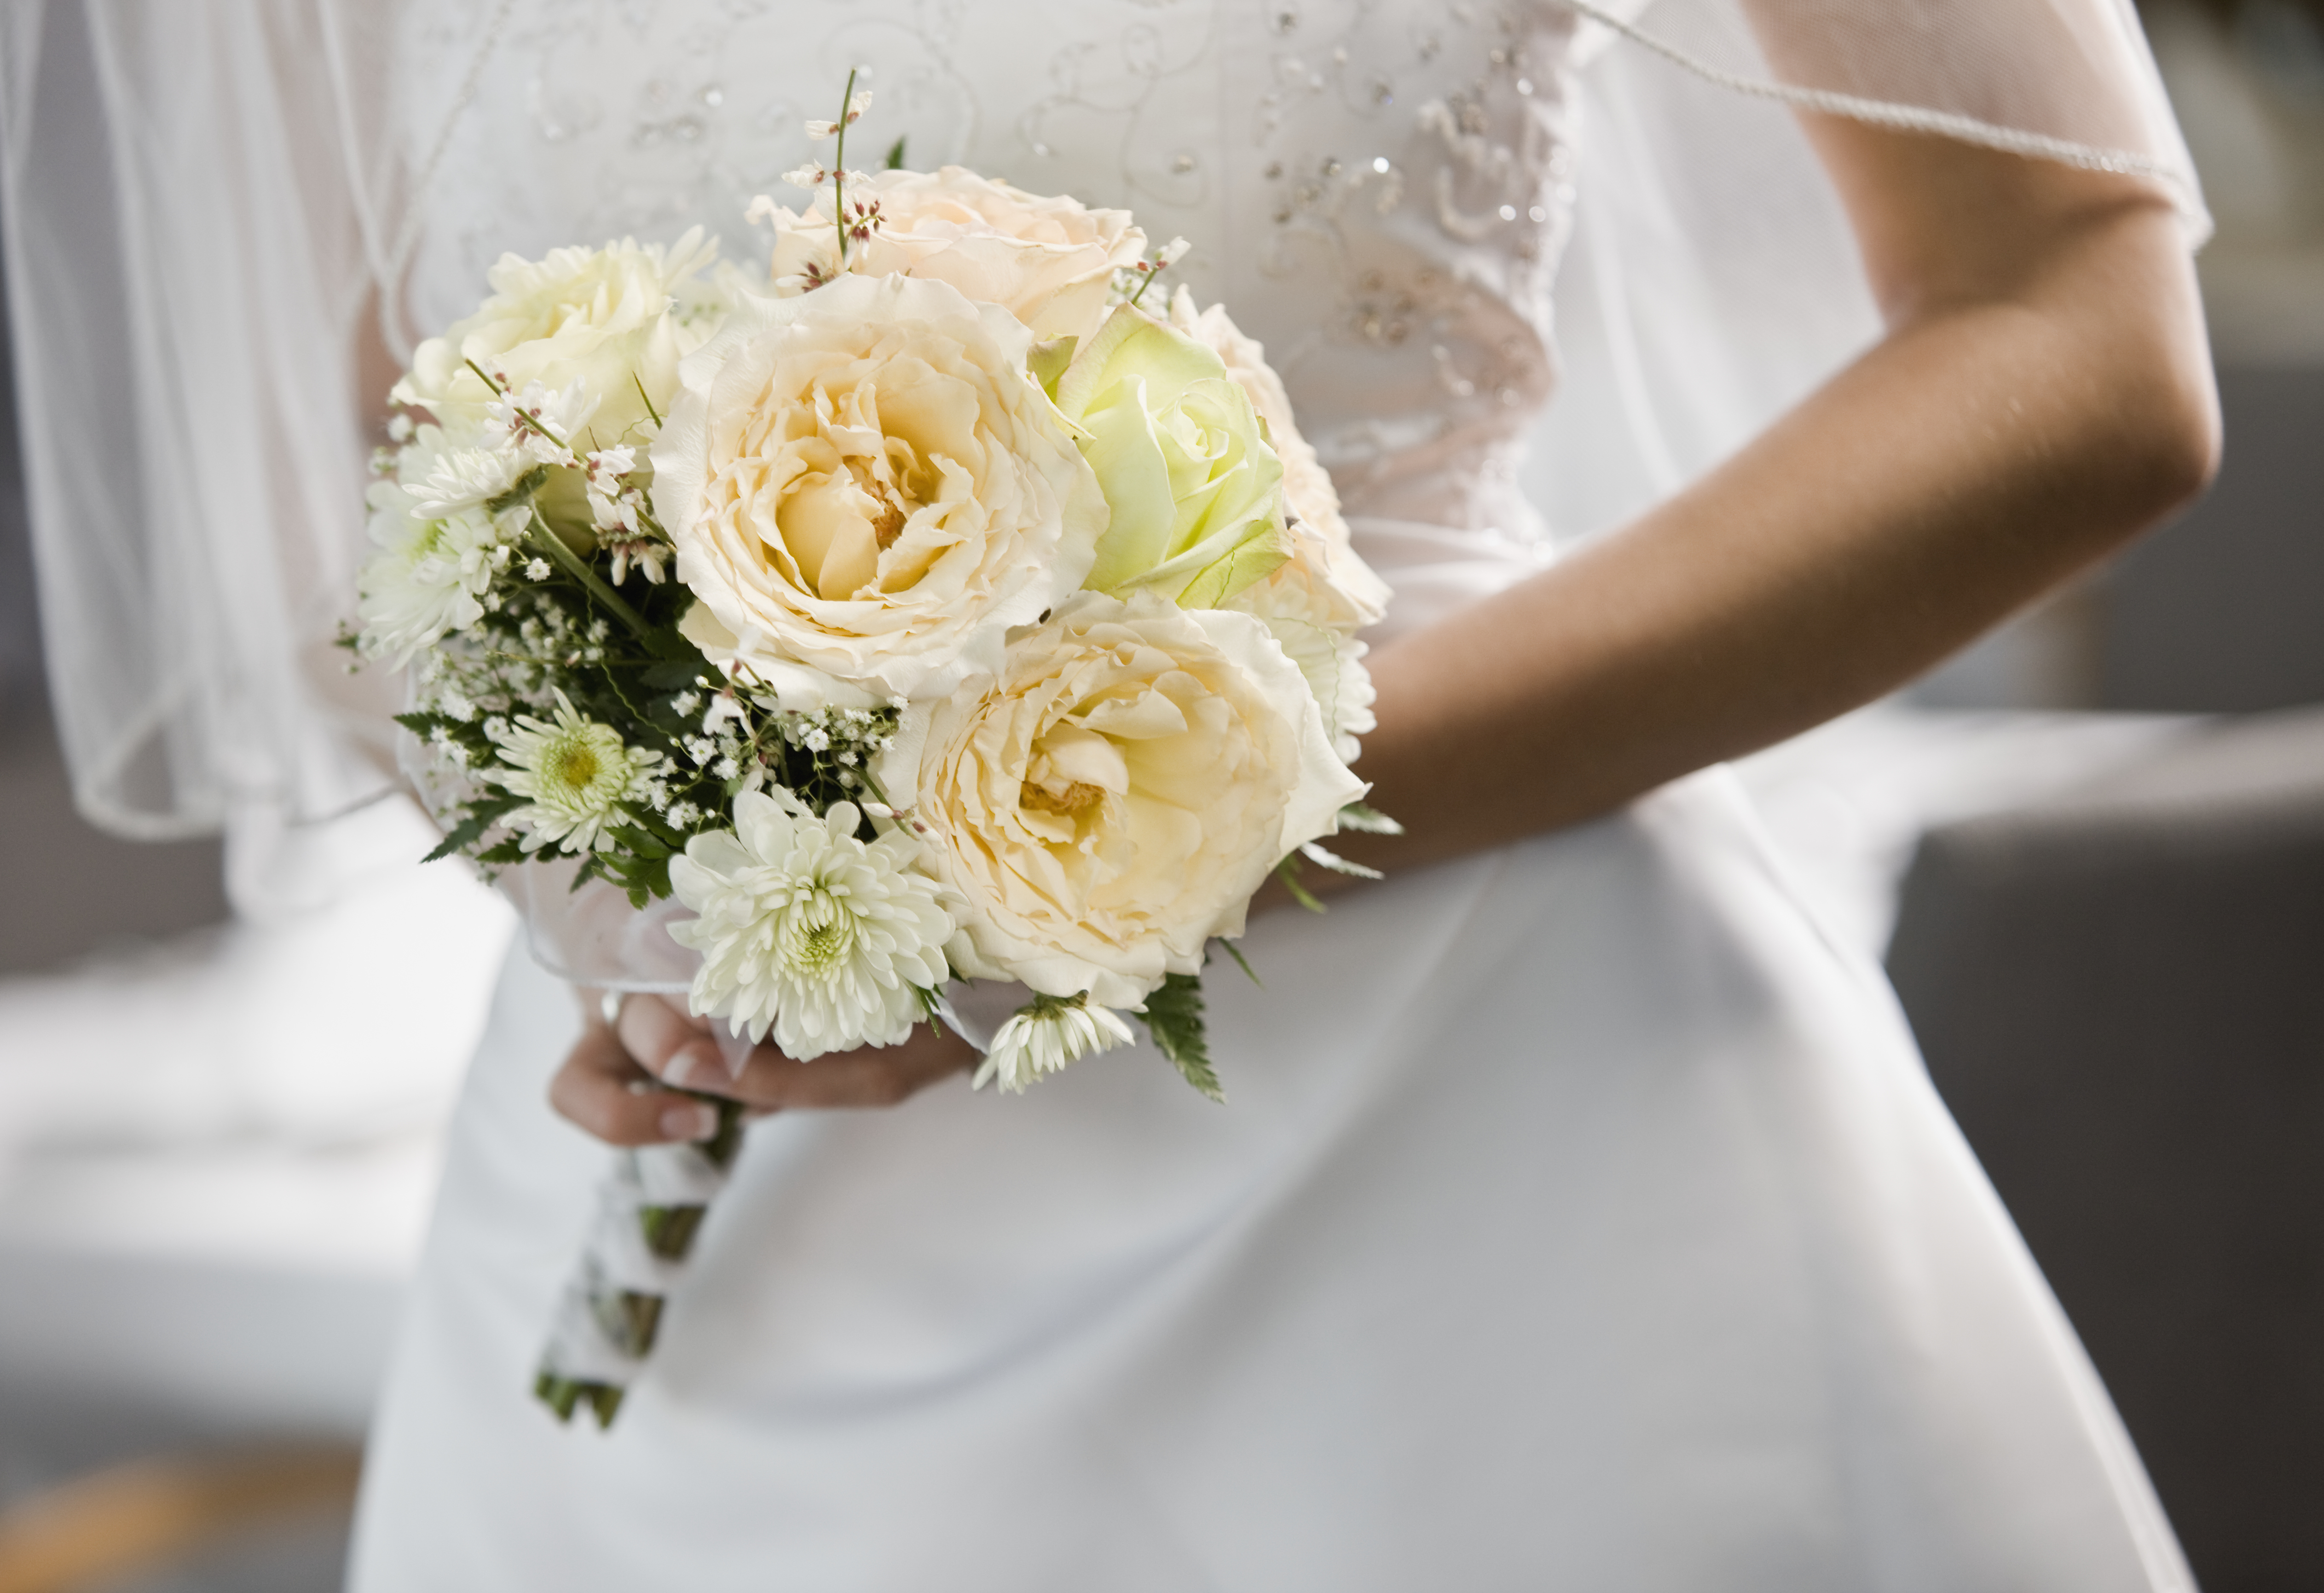 A bride holding flowers | Source: Getty Images